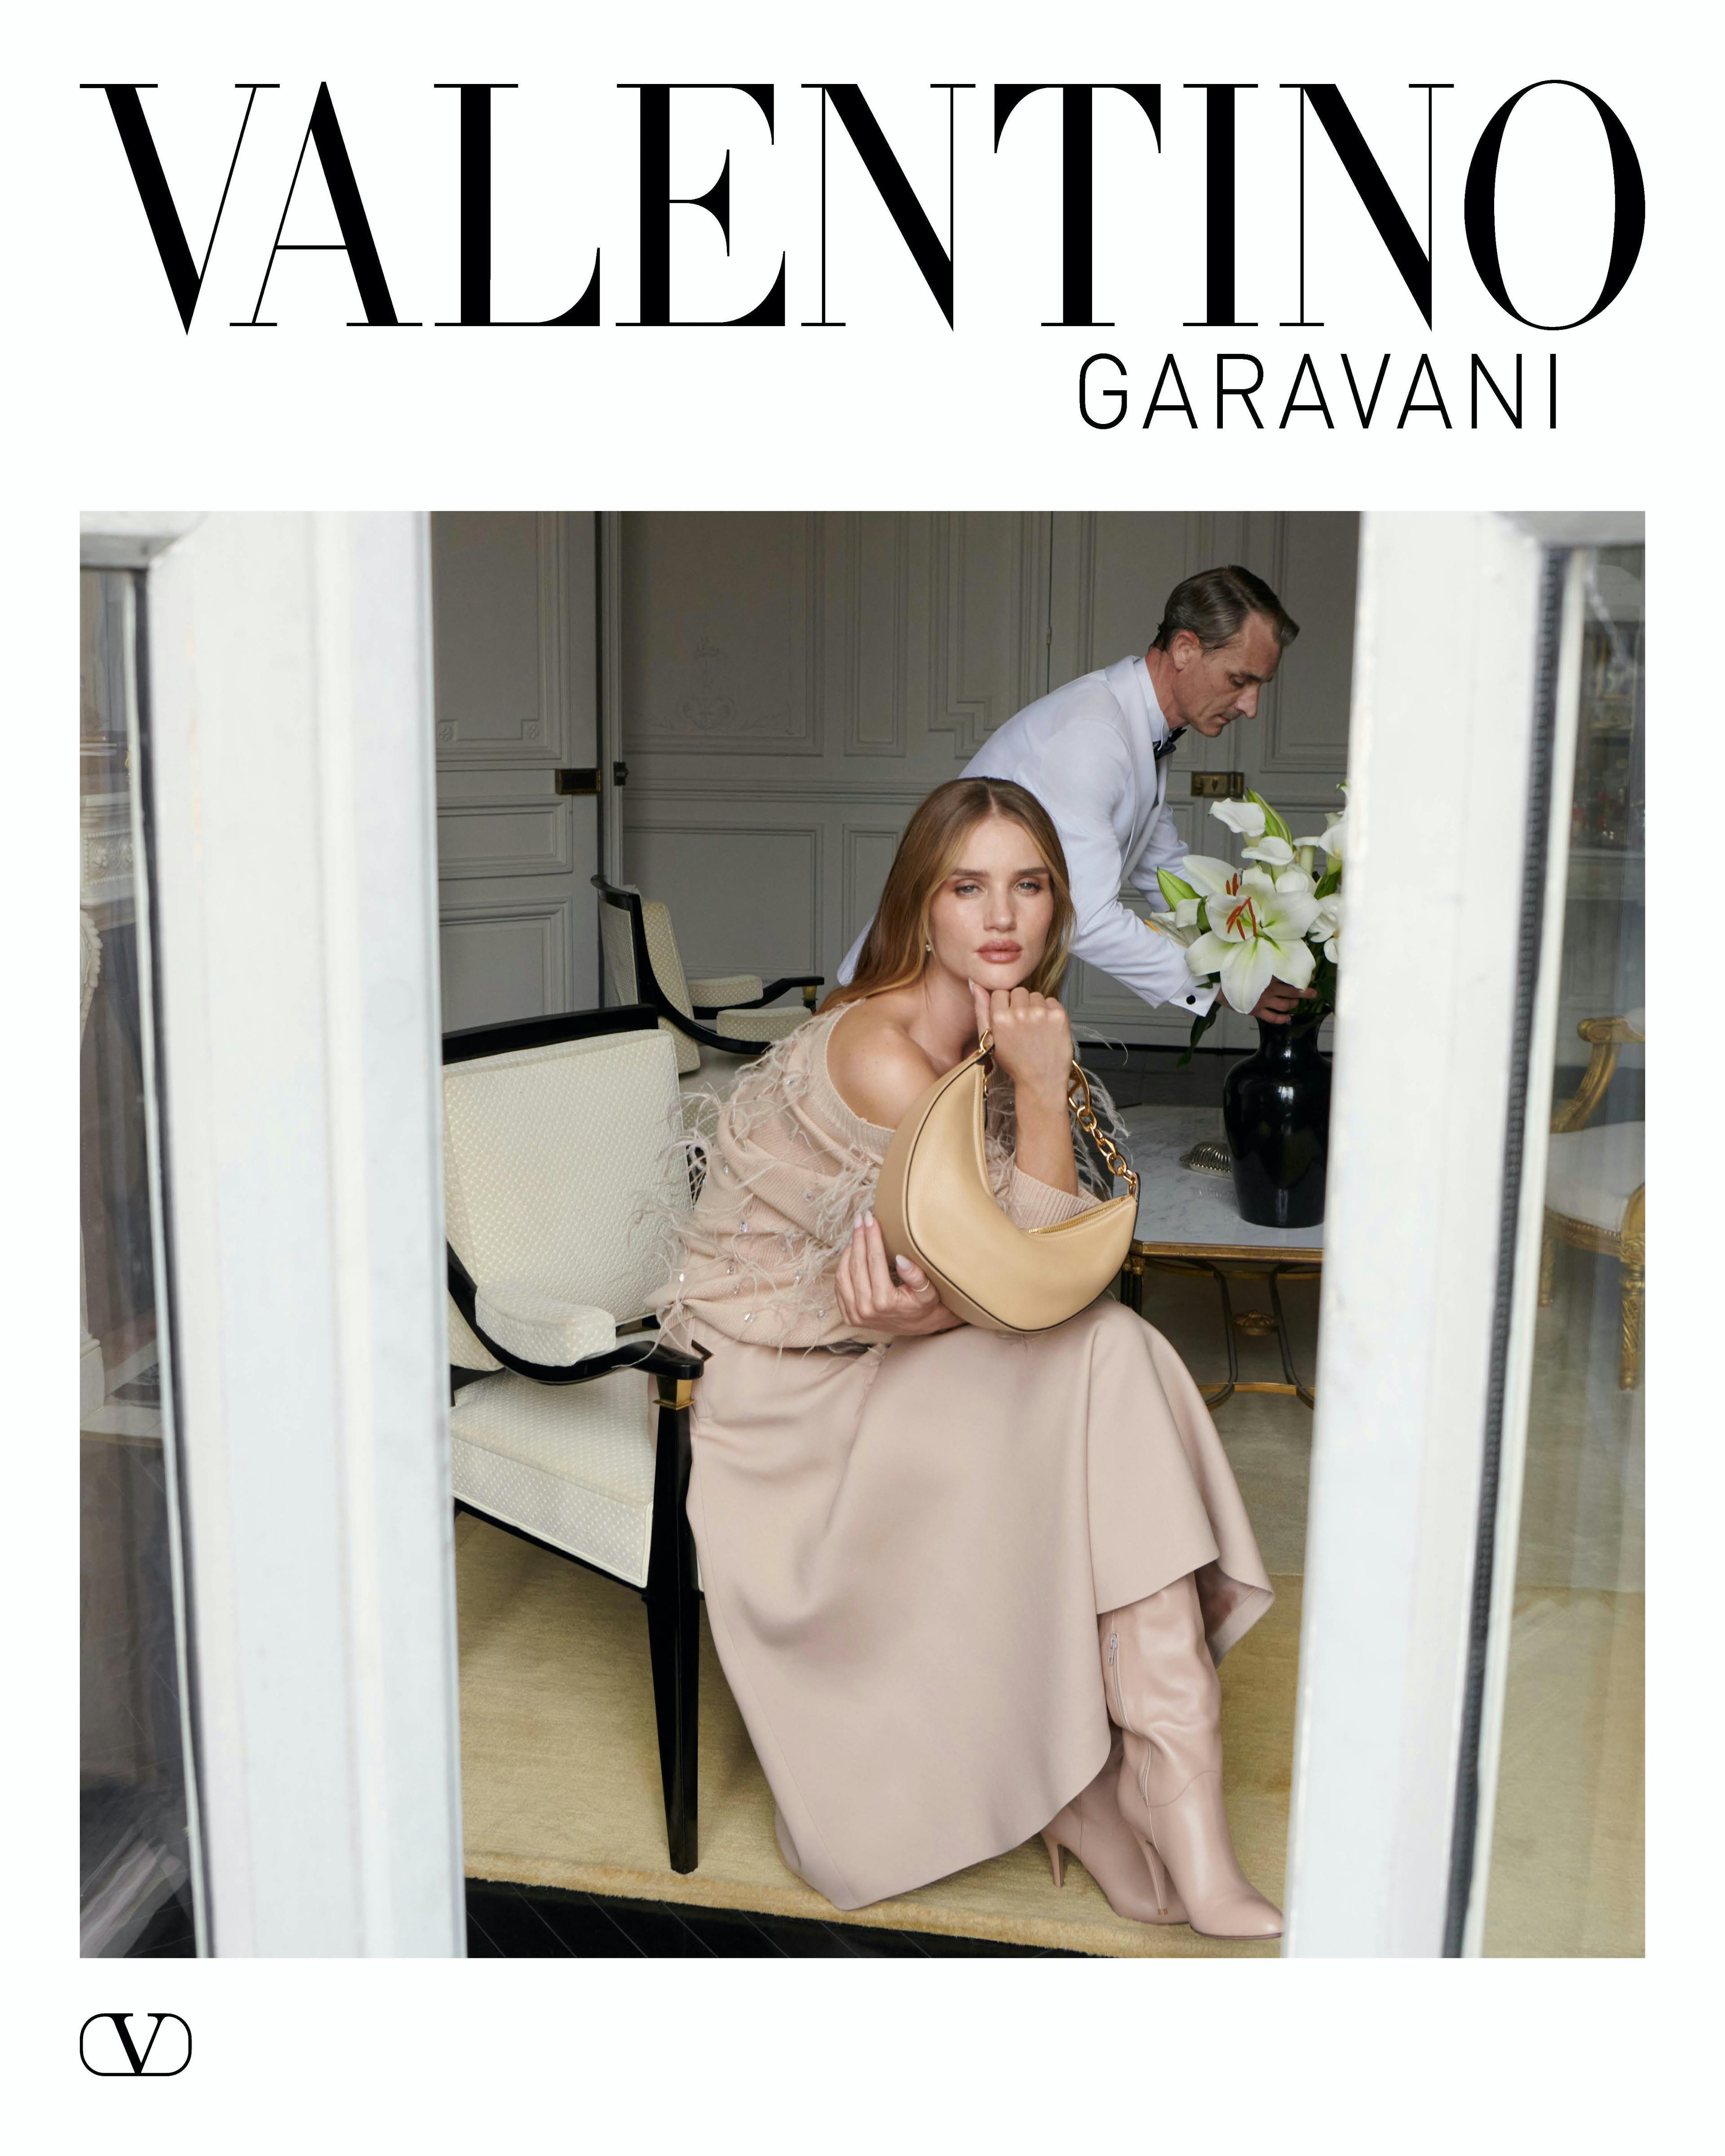 Rosie Huntington-Whiteley sitting in a nude colored flowy dress for a valentino campaign